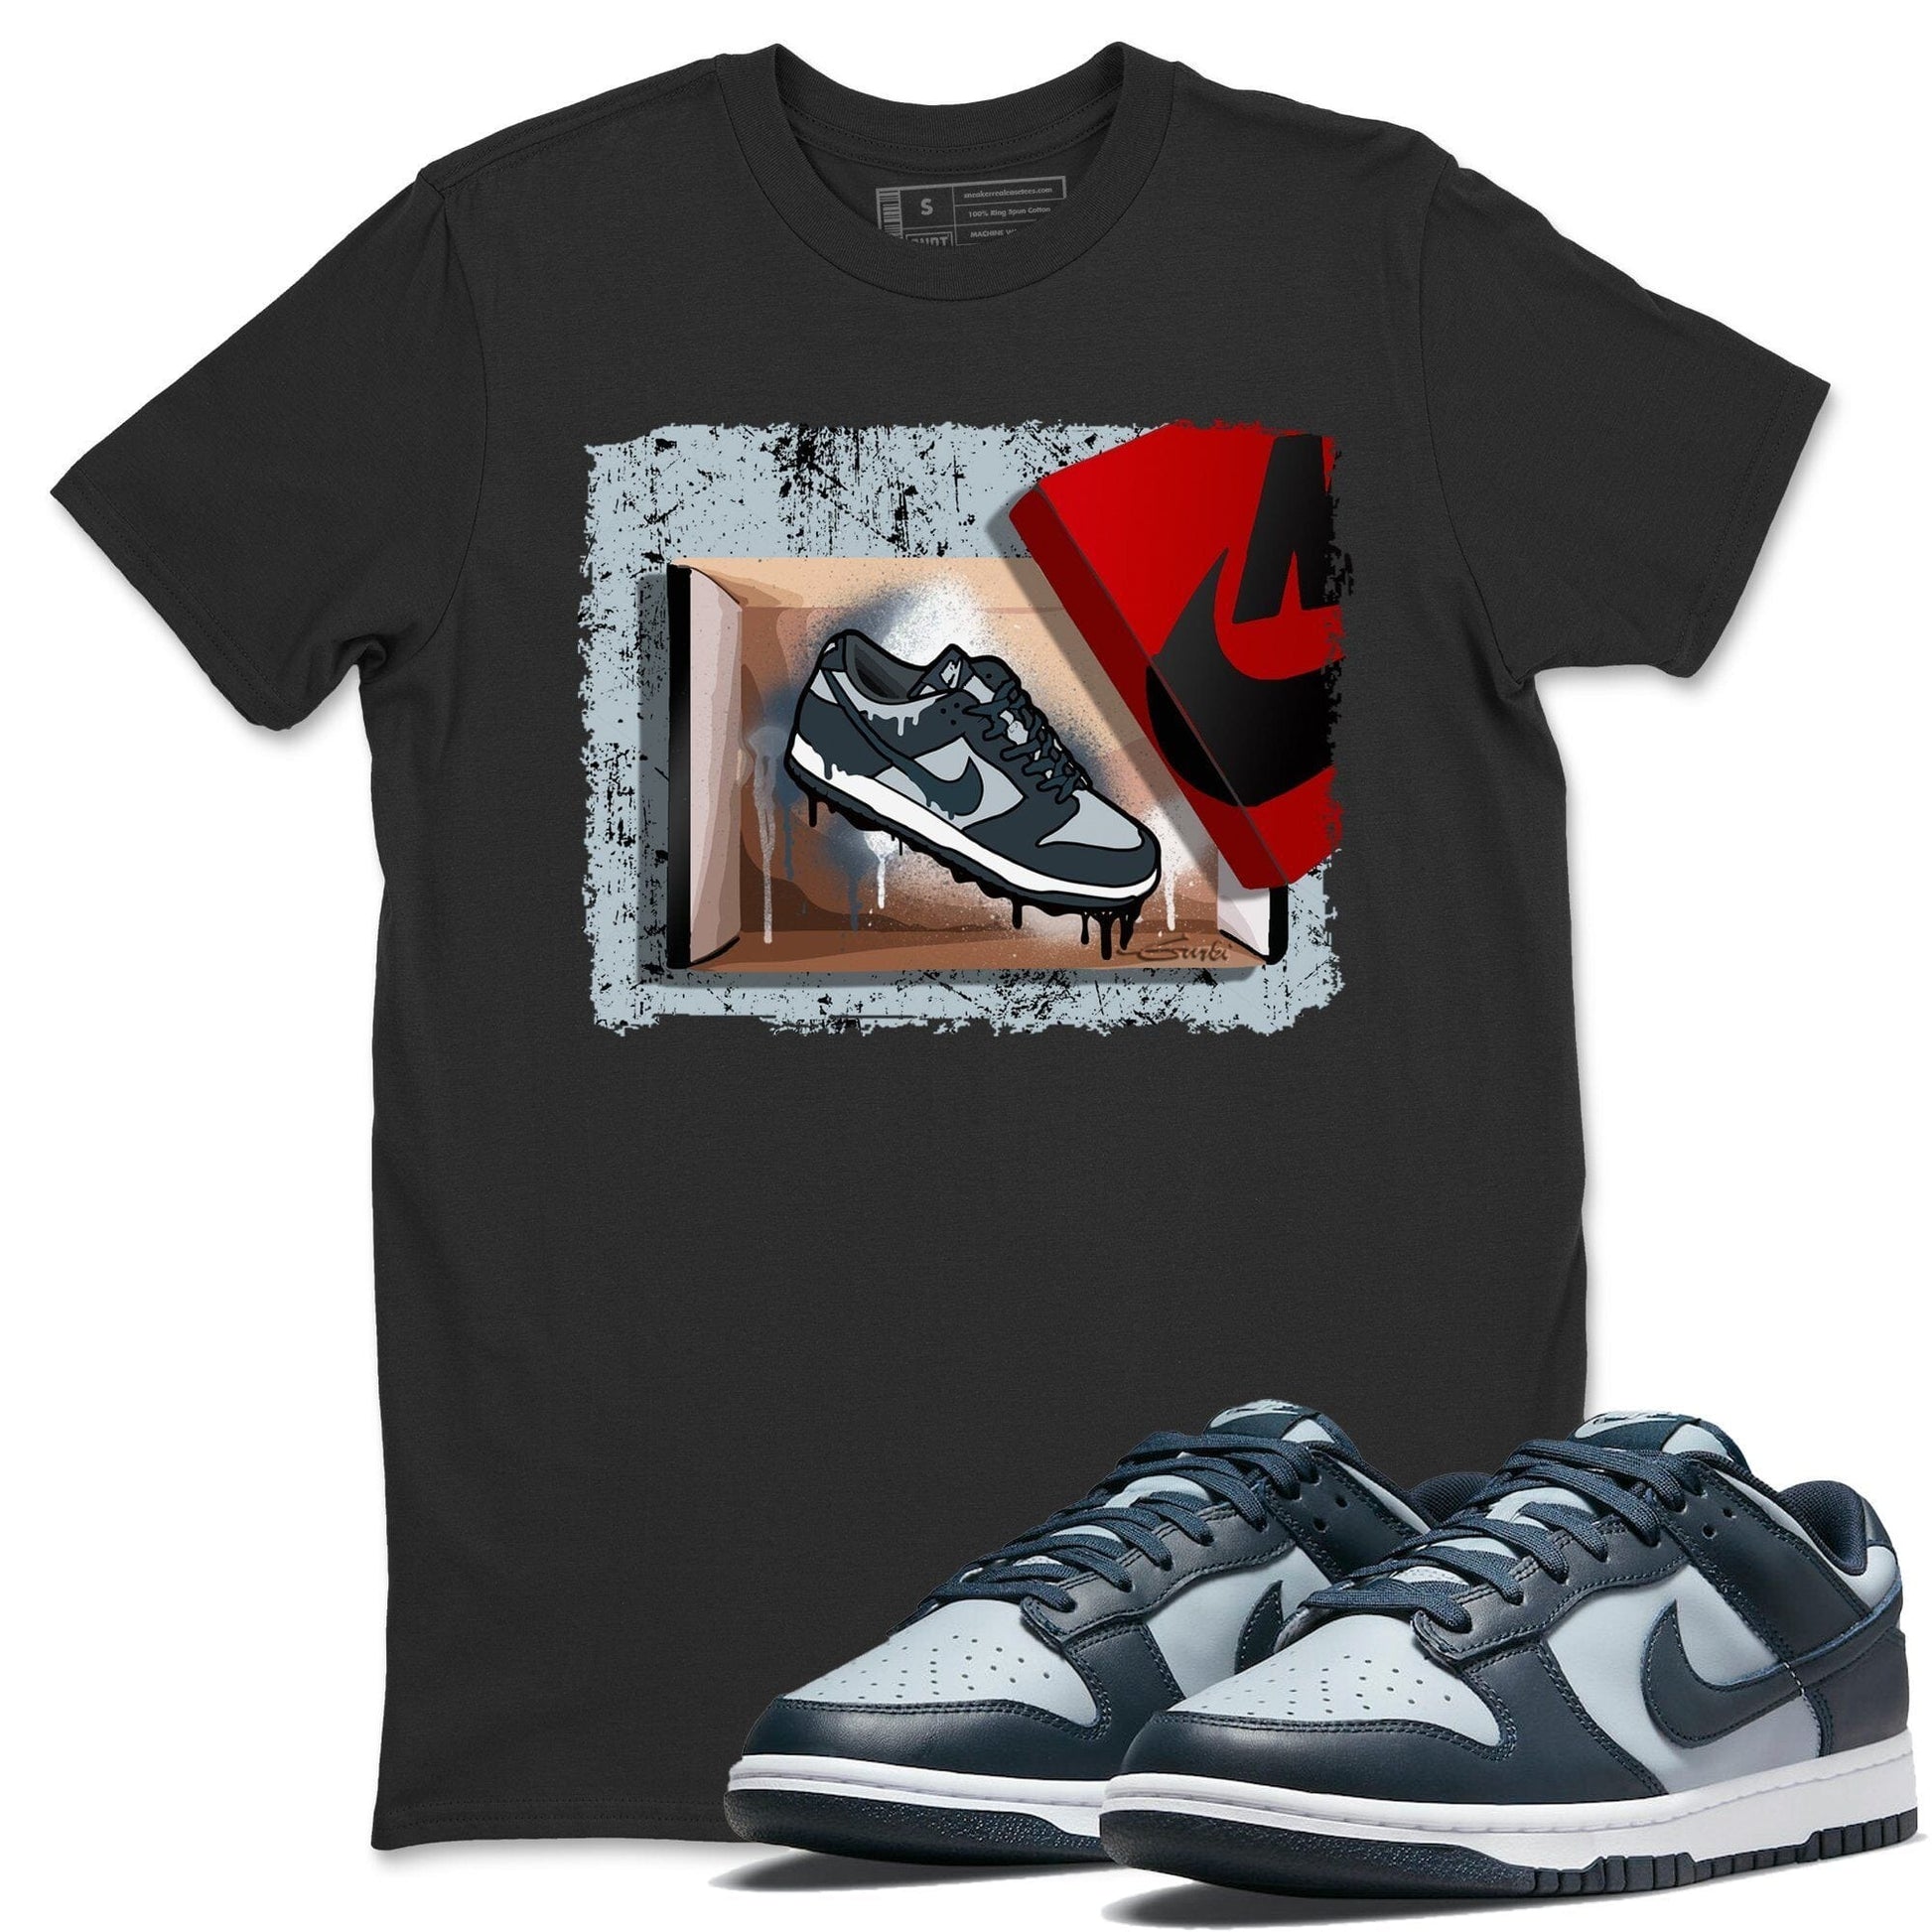 Dunk Championship Grey Sneaker Match Tees New Kicks Sneaker Tees Dunk Championship Grey SNRT Sneaker Tees Casual Short Sleeve Unisex Sneaker T-Shirts